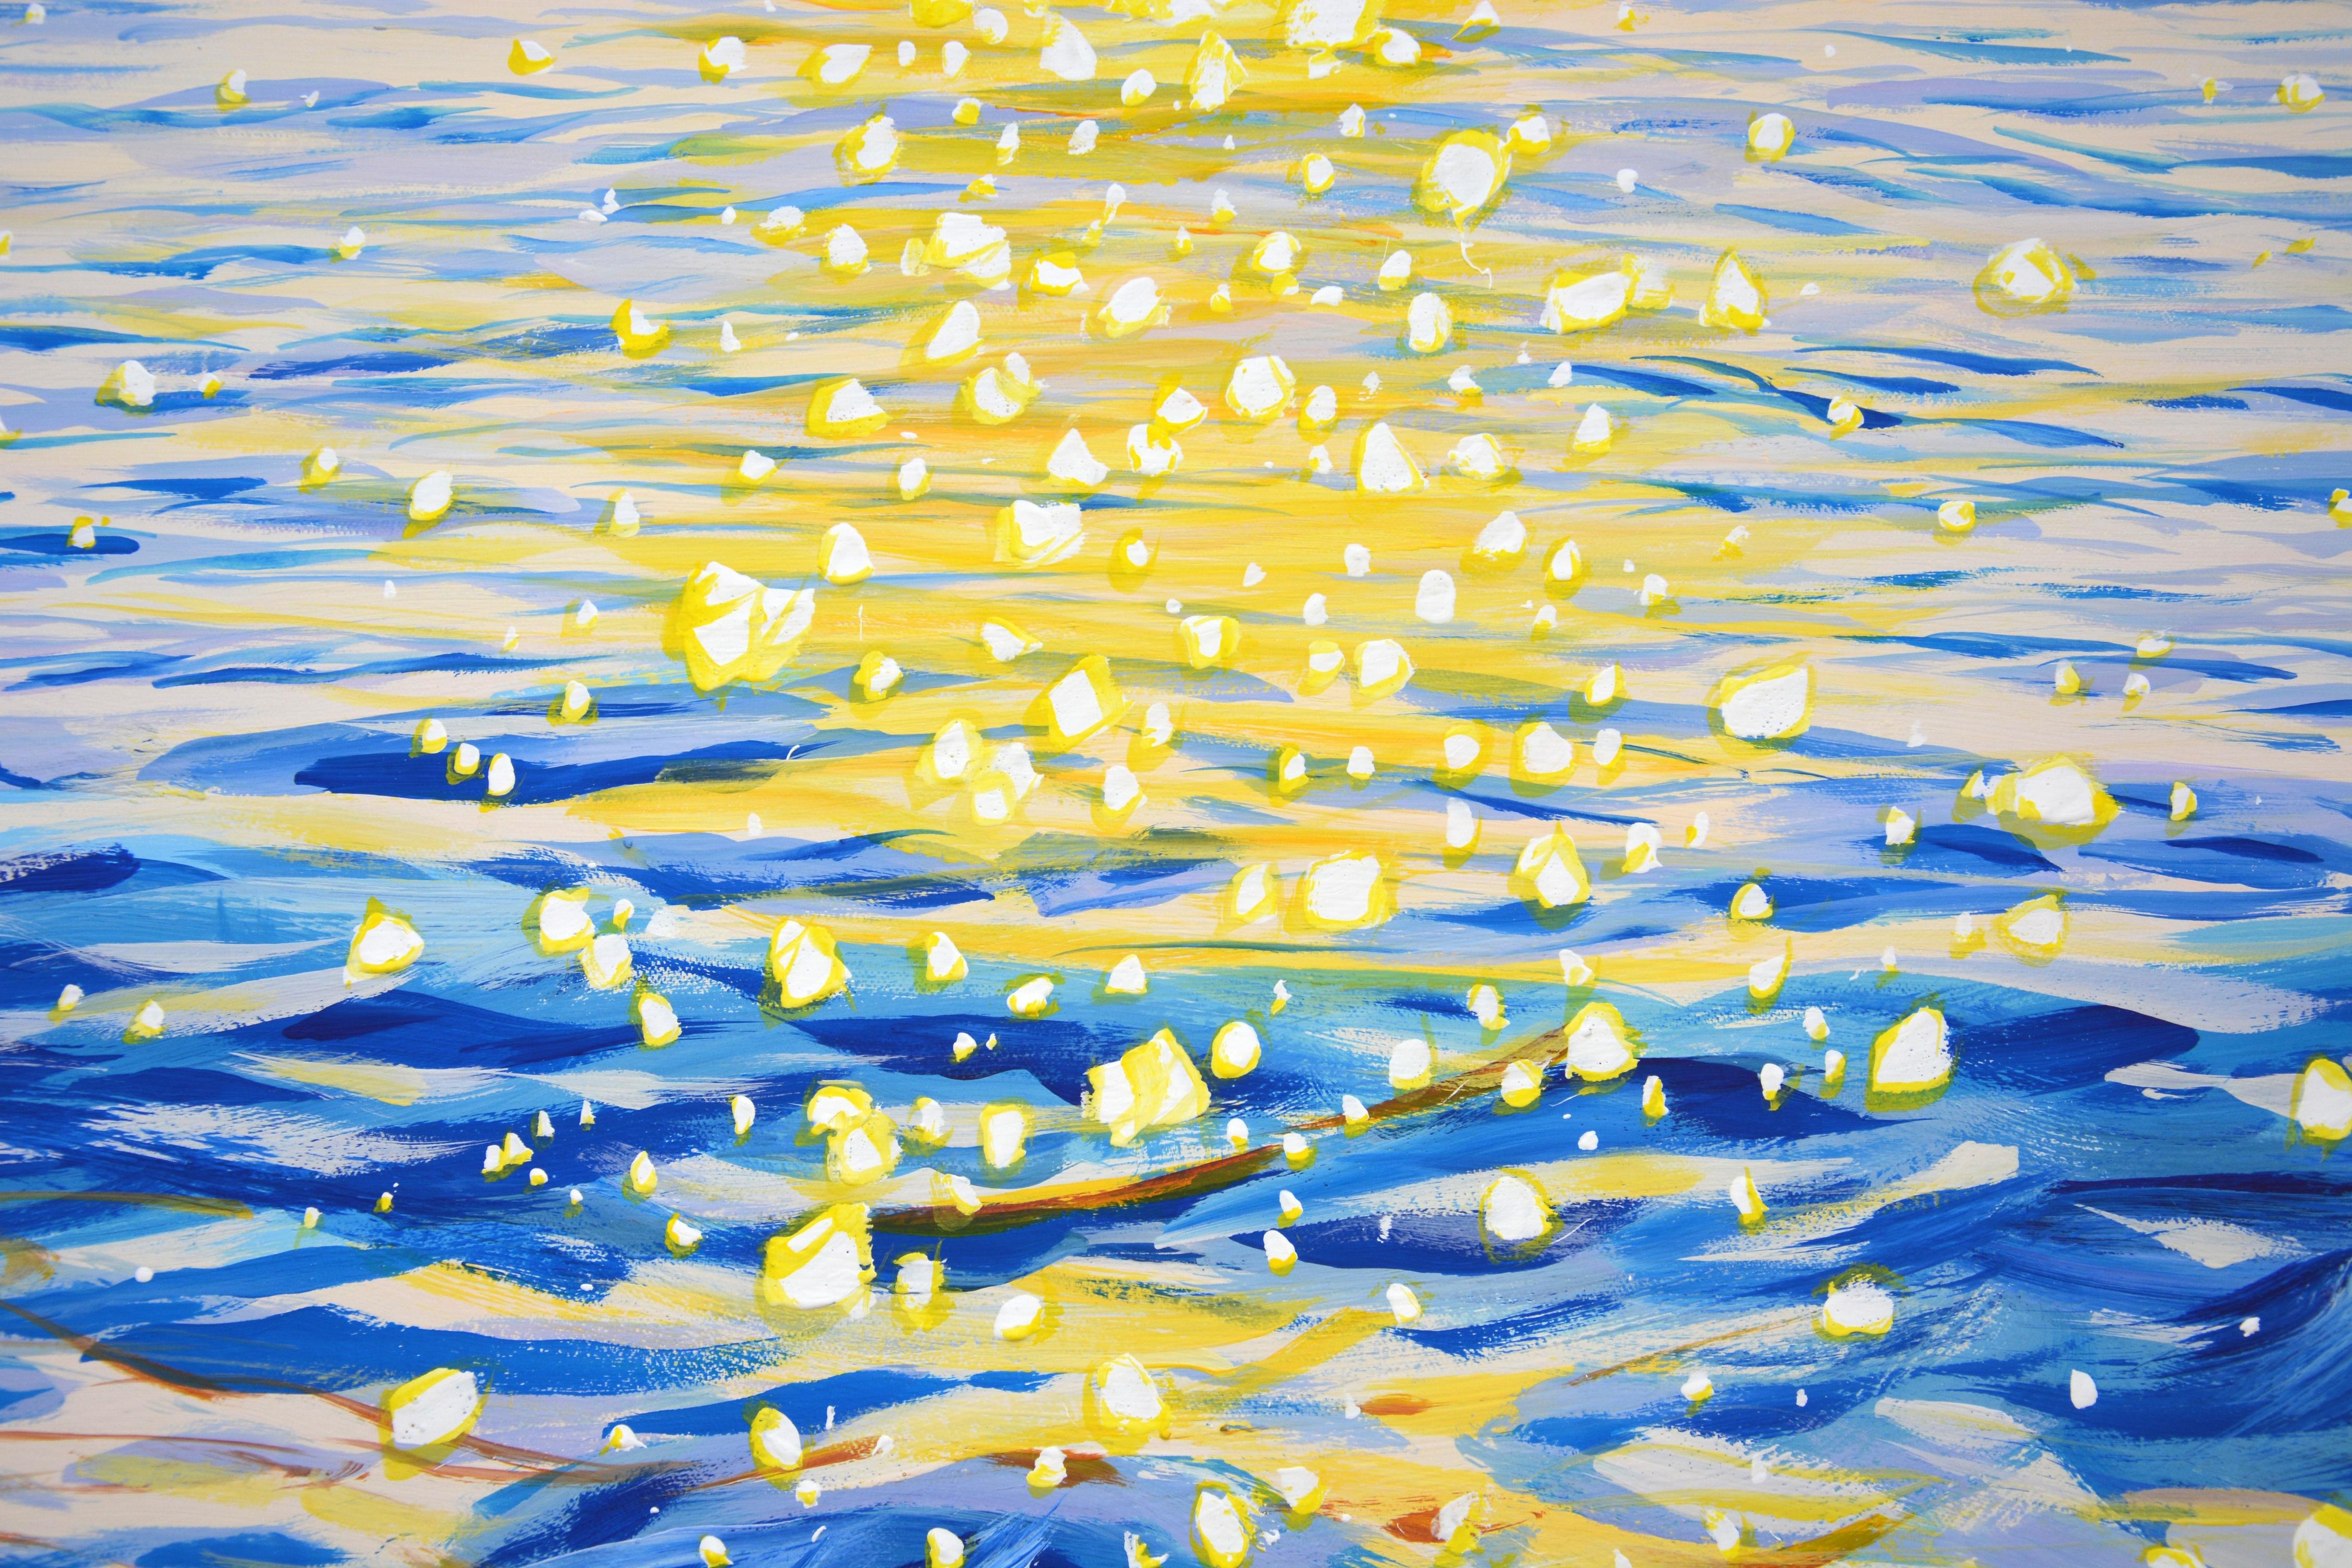 Artist Iryna Kastsova. Original acrylic painting on canvas with water and sky. Blue water in the sunlight.
Beautiful interior painting for home and office.
From the collection 